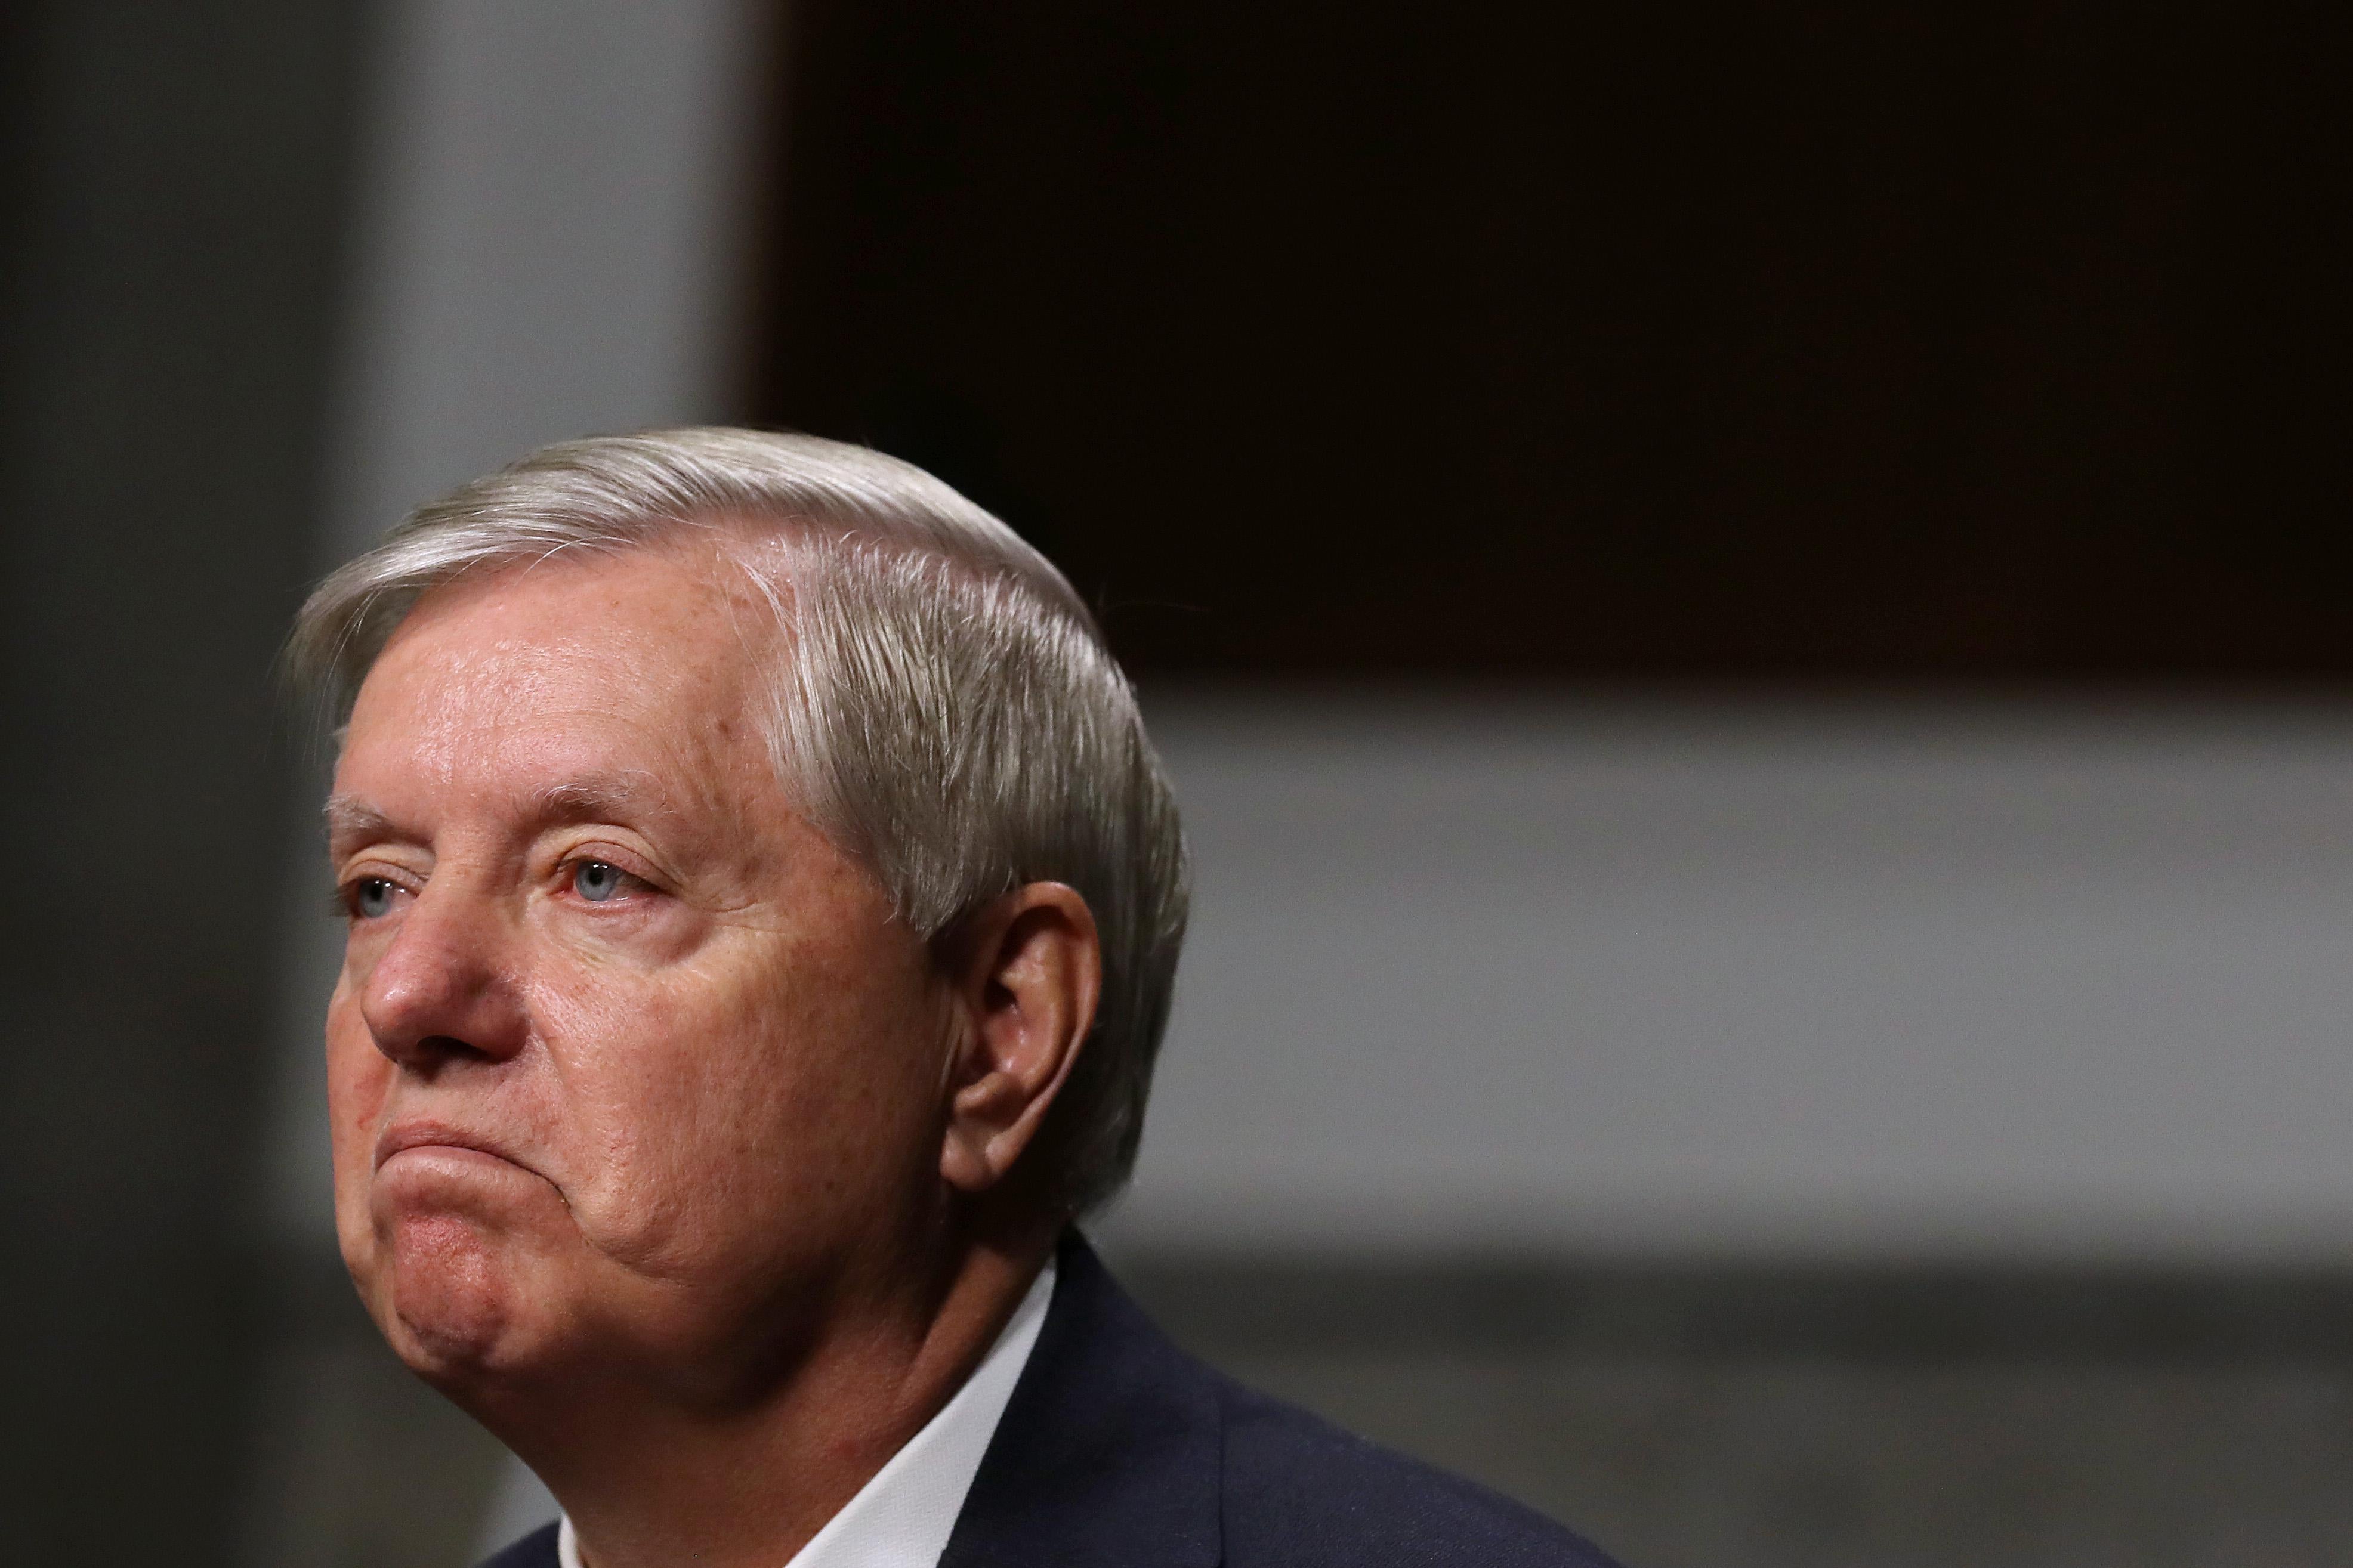 Lindsey Graham frowning in a Senate hearing room